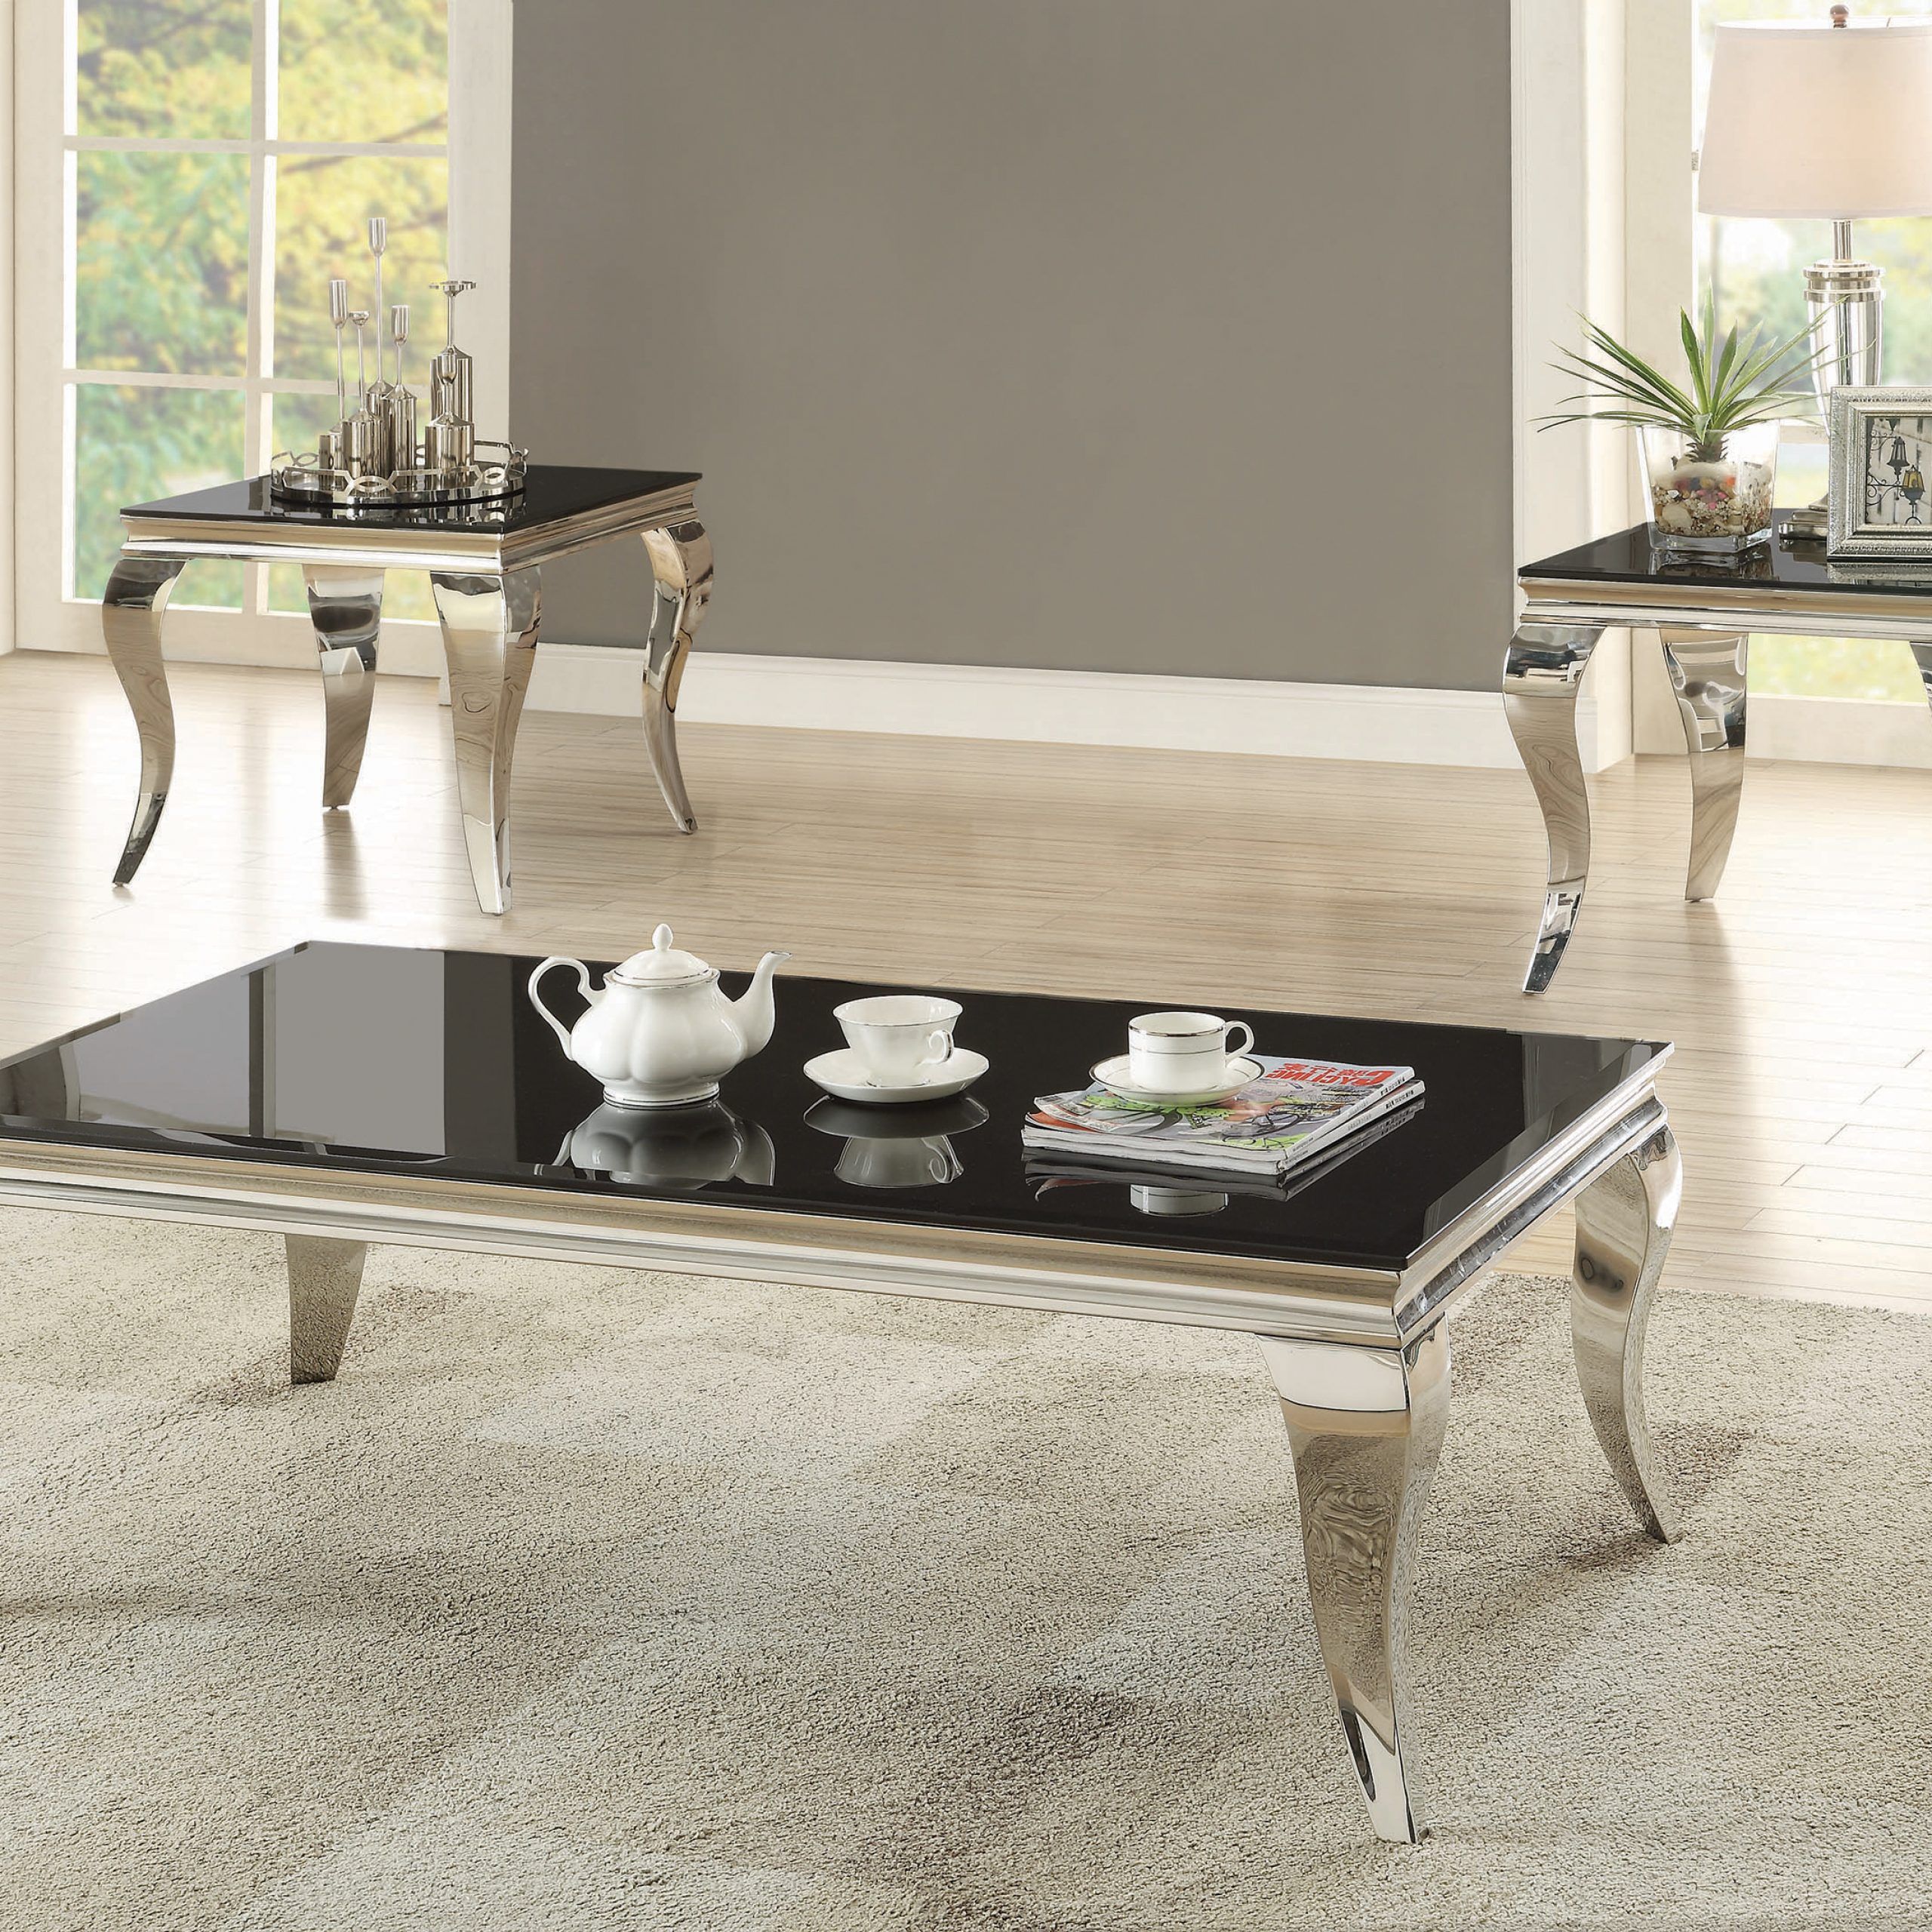 Best And Newest Chrome And Glass Rectangular Coffee Tables In Rectangular Coffee Table Chrome And Black – Coaster Fine Fur (View 8 of 10)